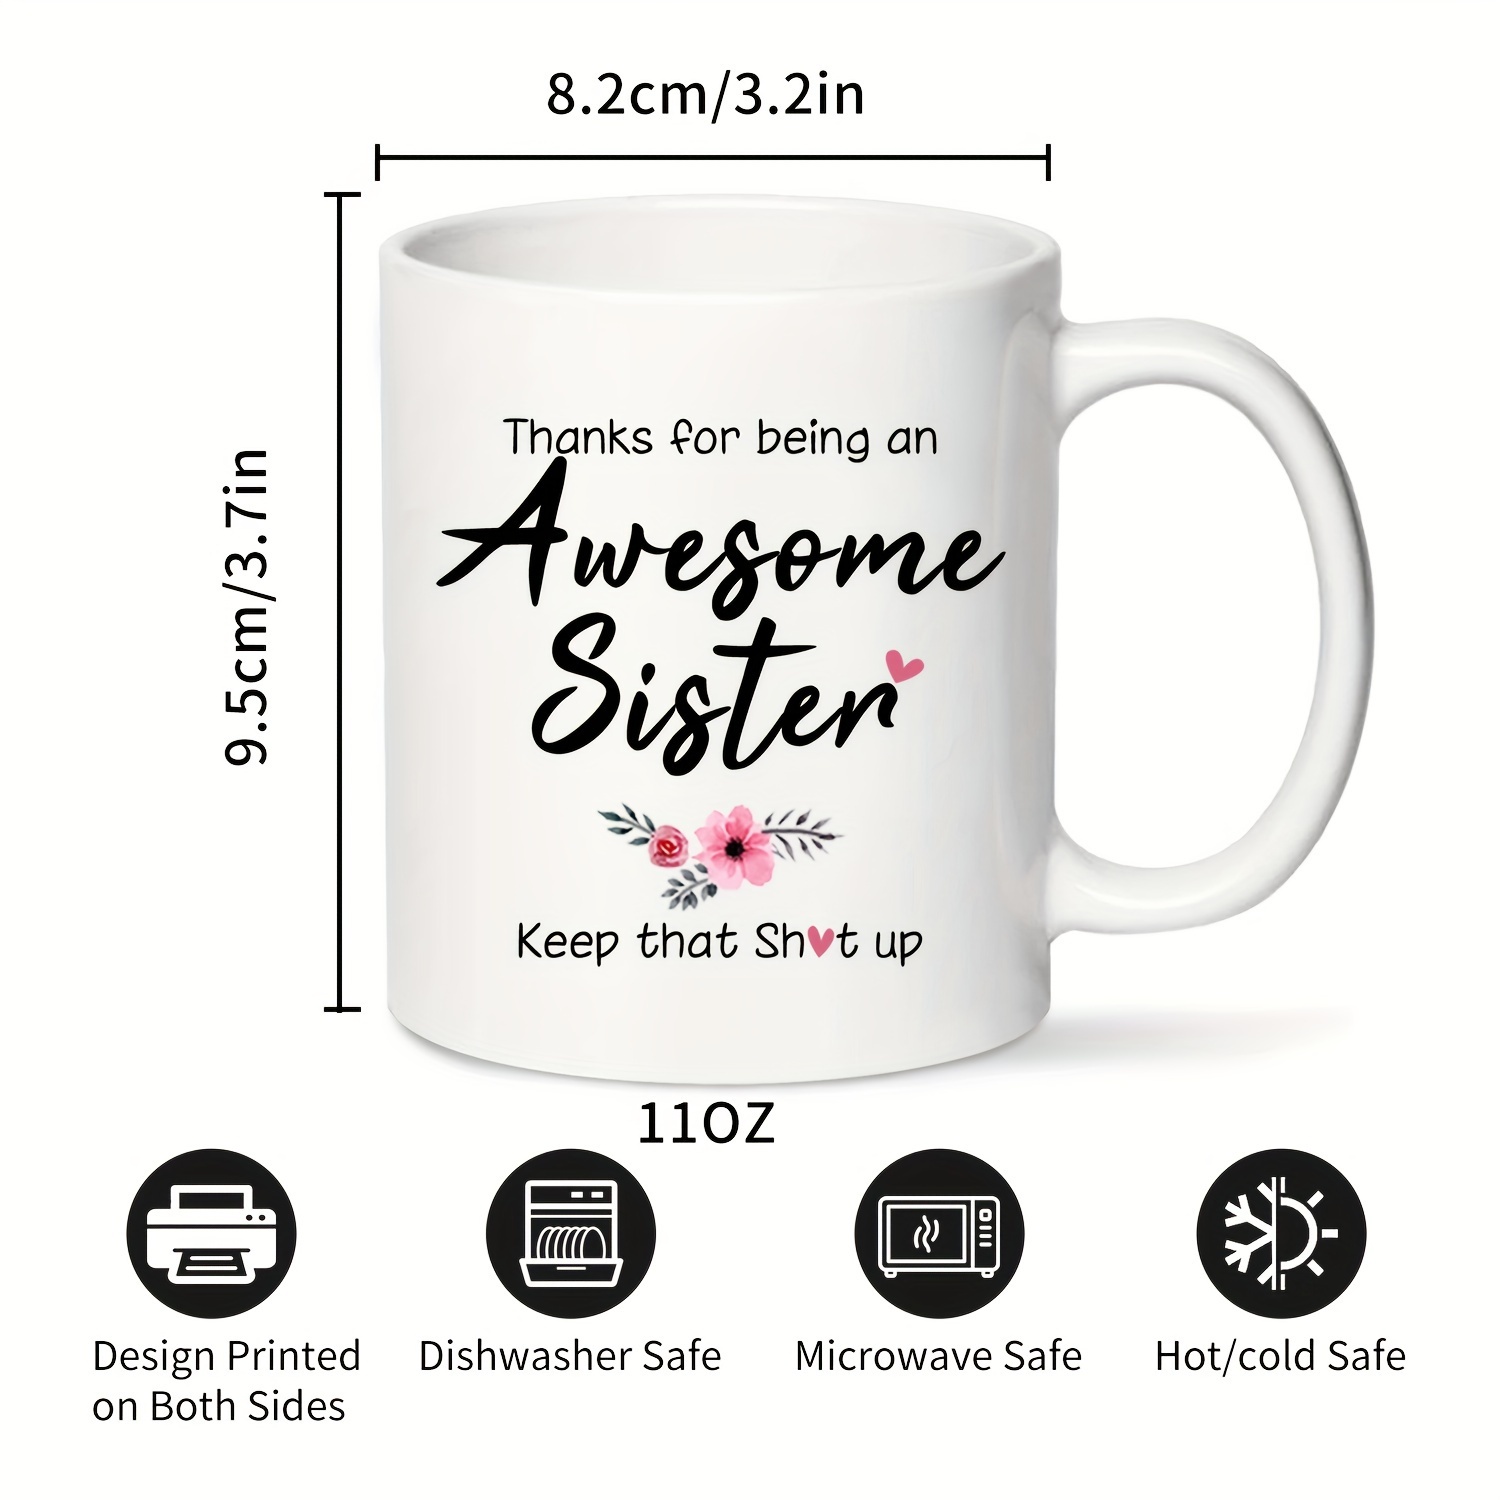 Sister Birthday Gifts from Sister, Sister Gifts Coffee Tumbler